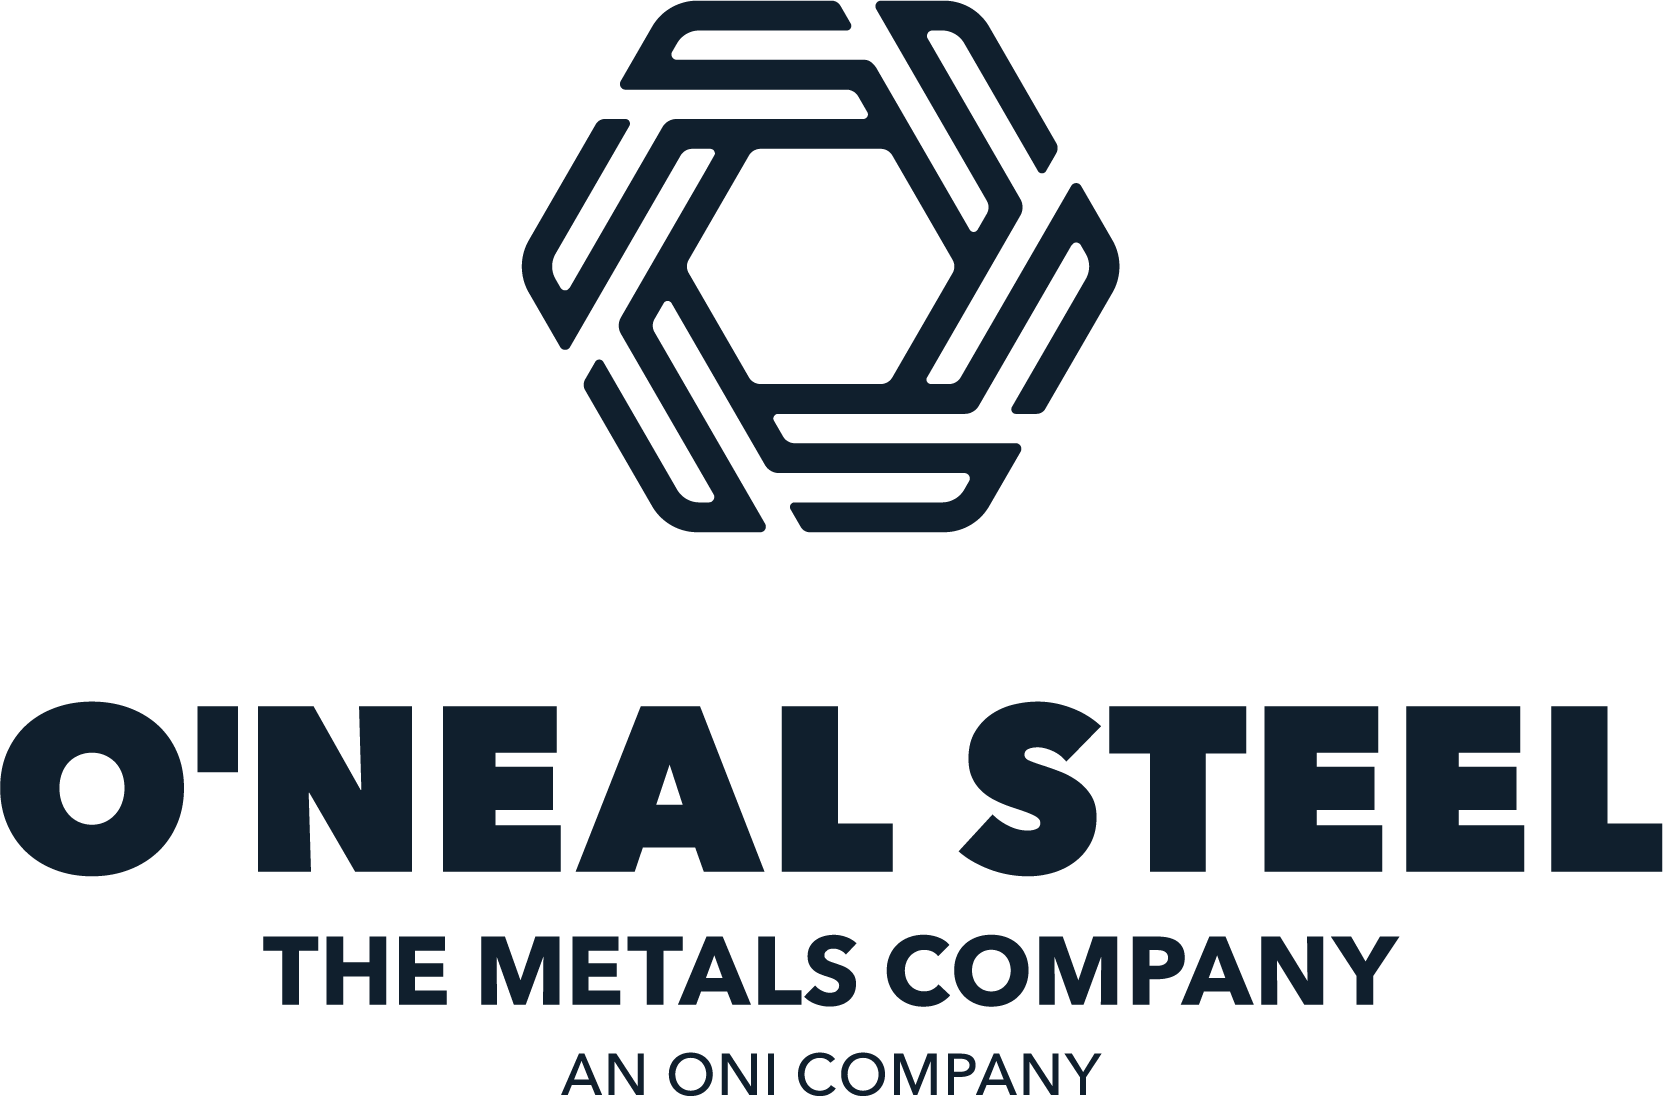 This image features the logo of O'Neal Steel, which includes geometric shapes and text that reads 